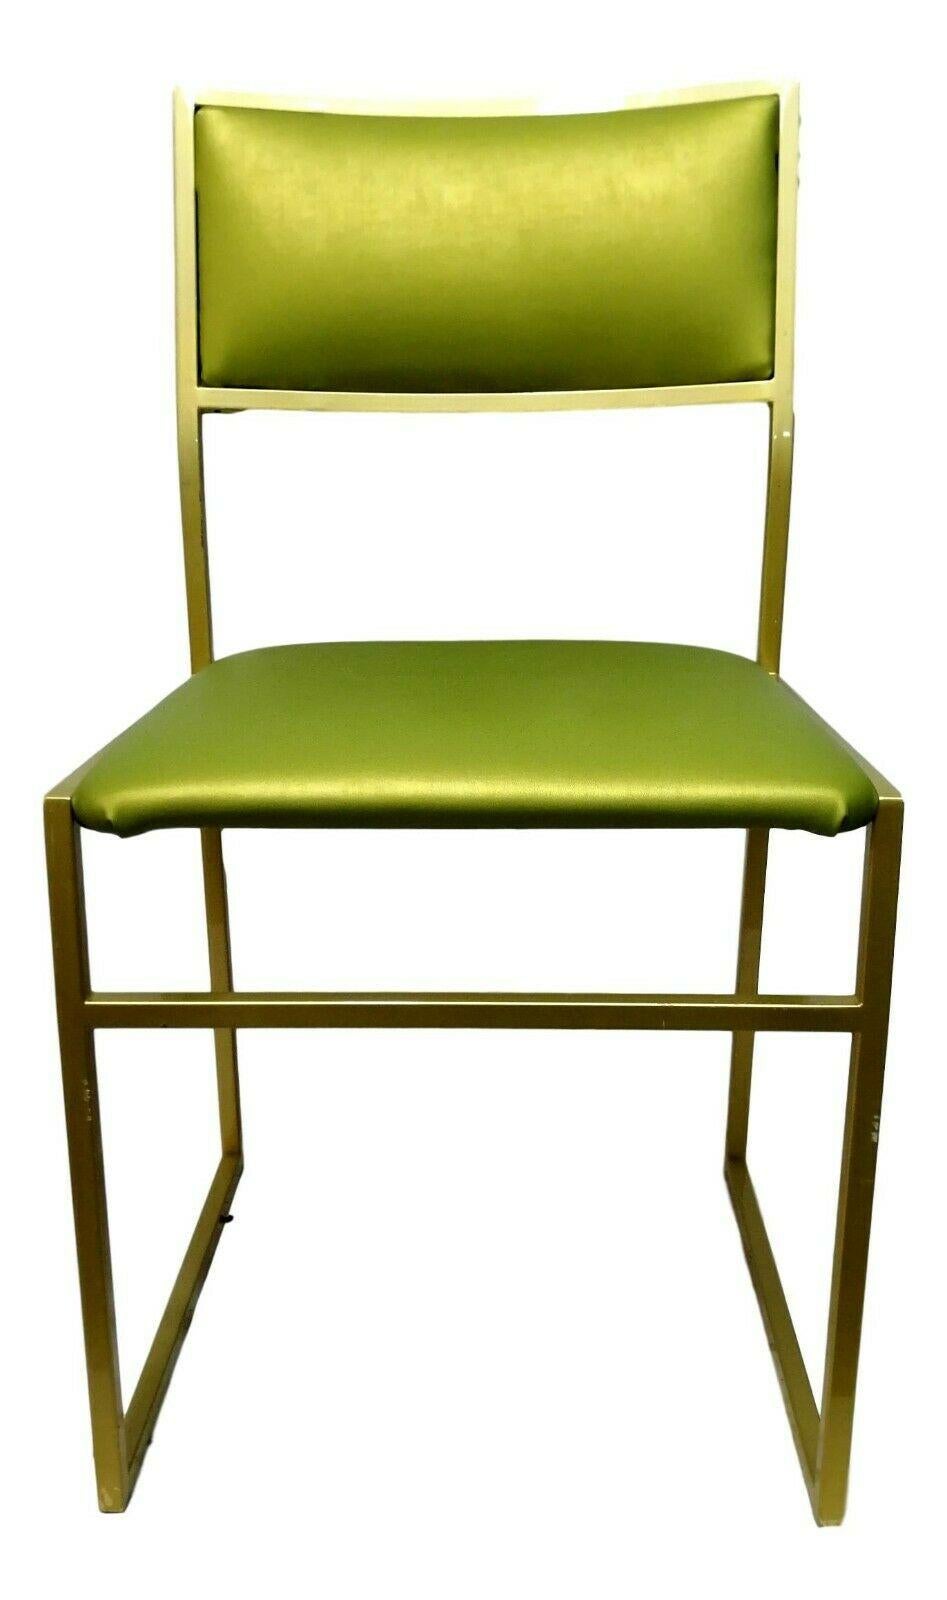 Lot of Six Collectible Coloured Chairs in Gold Metal, 1970s For Sale 6